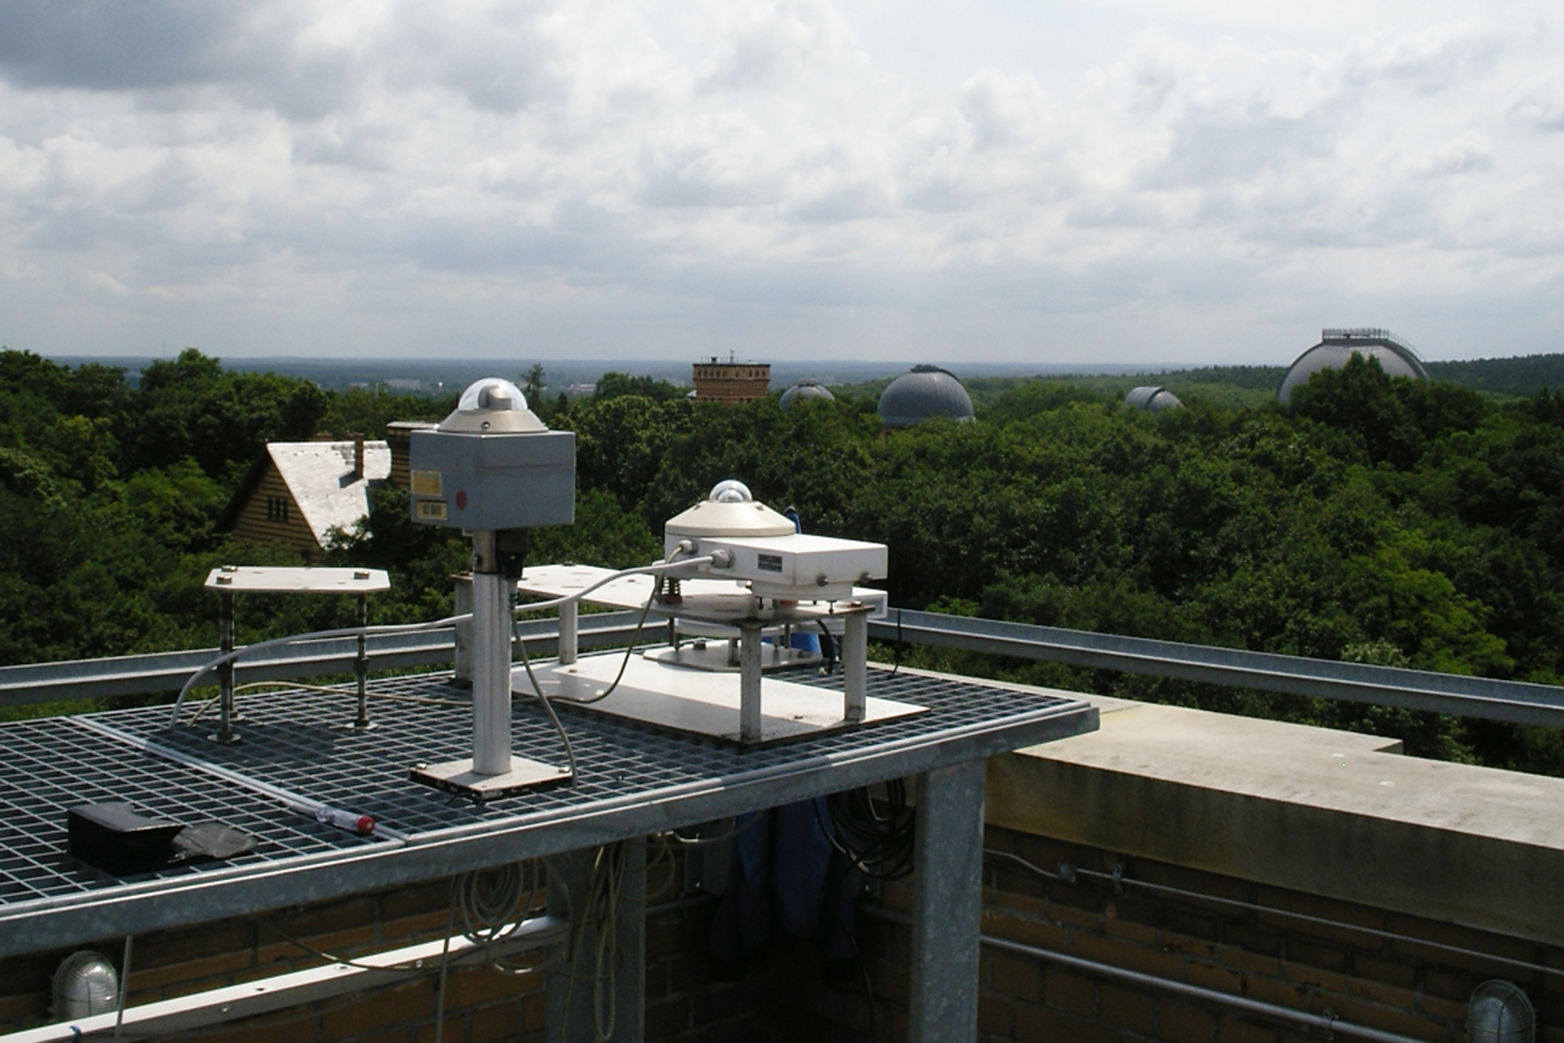 solar radation measuring instruments on a roof